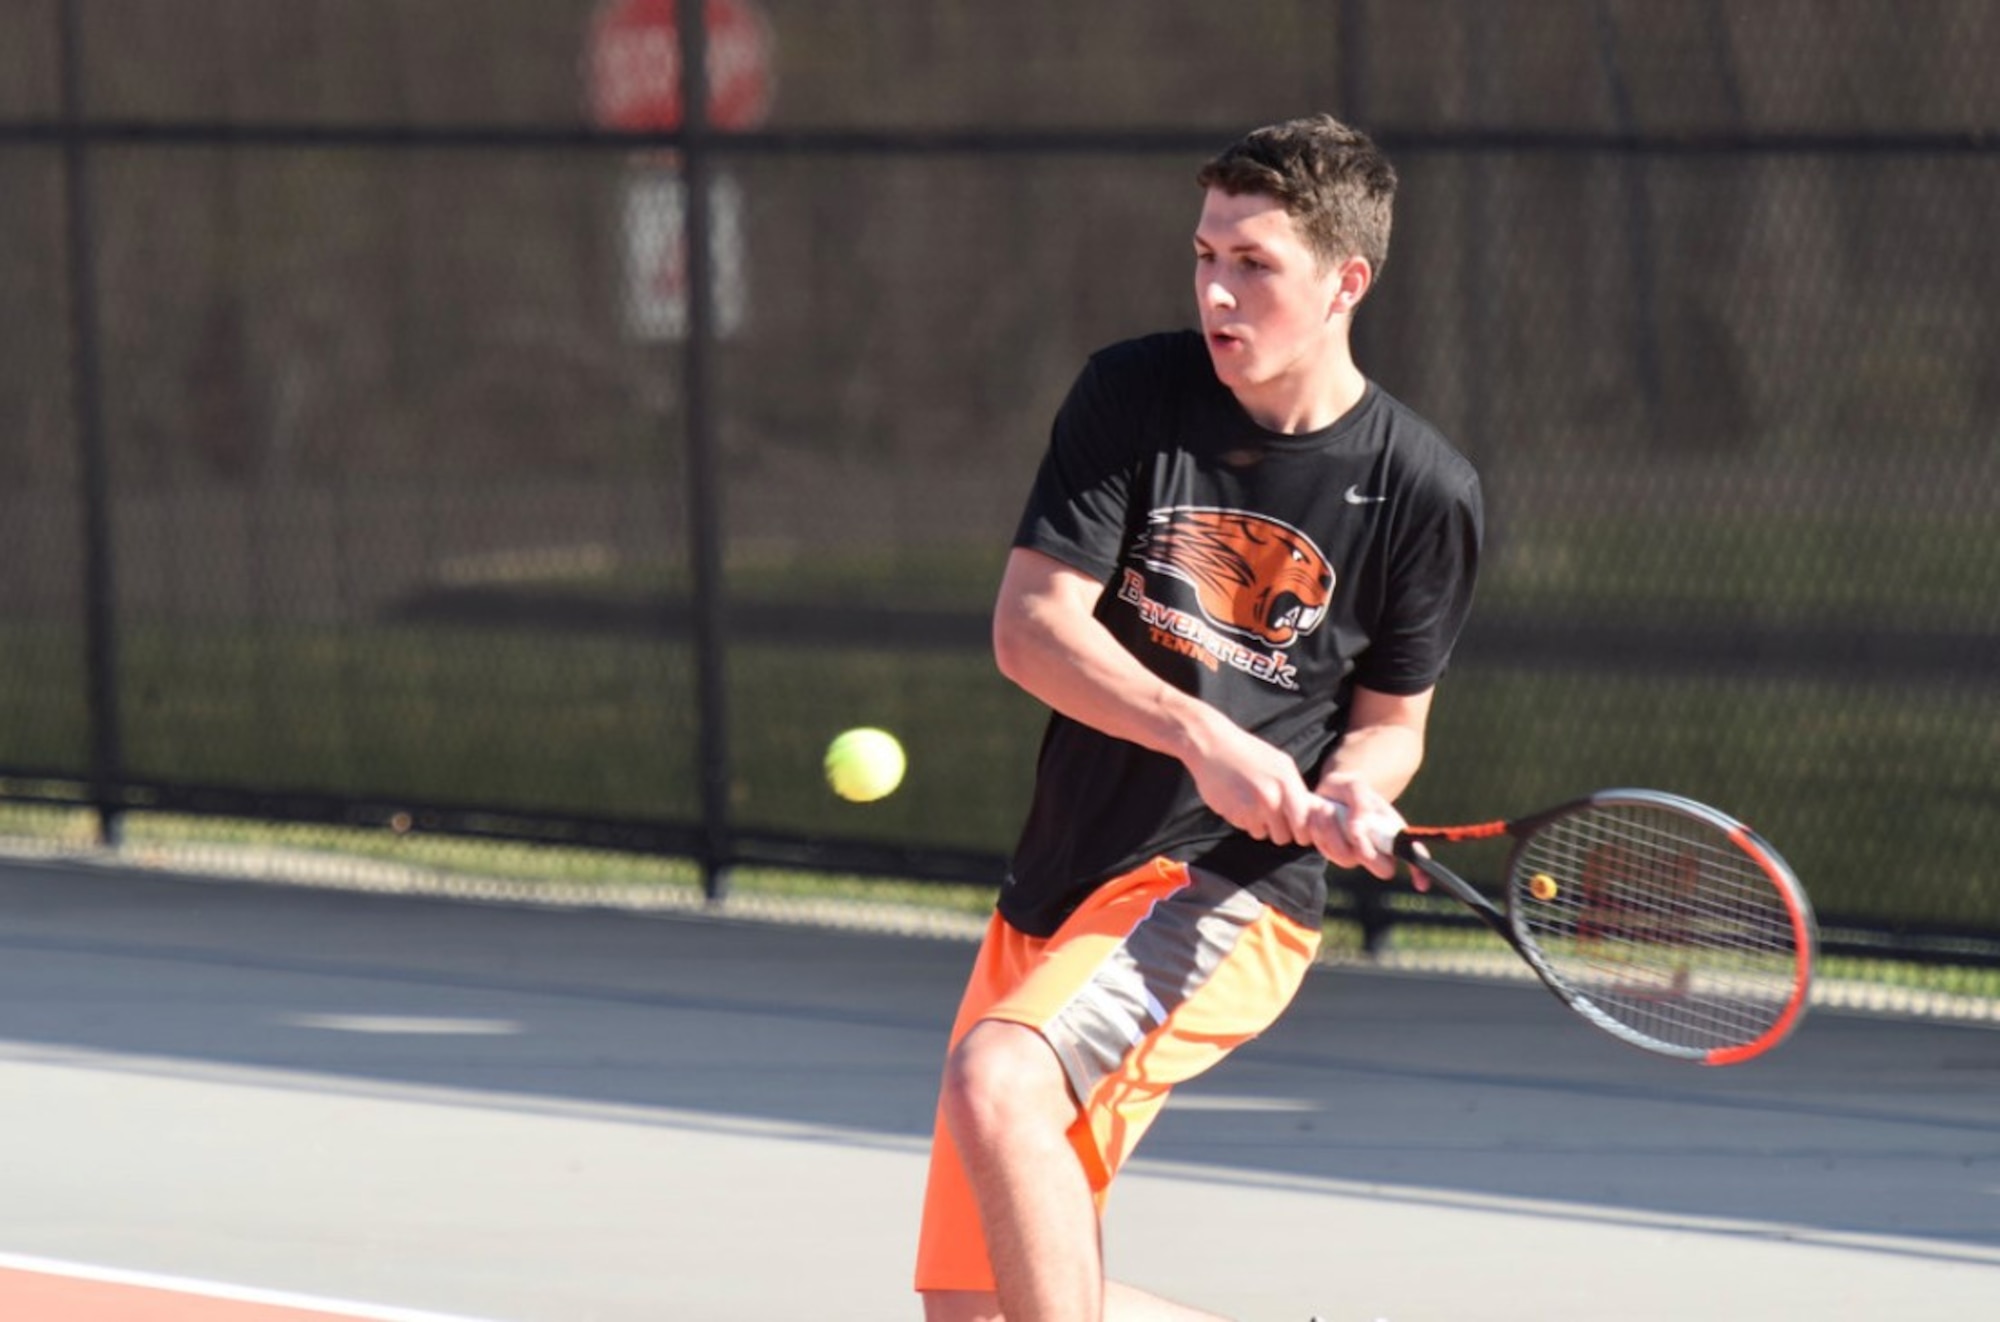 Beavercreek High School senior Aaron Staiger works on his backhand during varsity team practice earlier this fall. Tennis is among his many after-school activities. (Contributed photo)